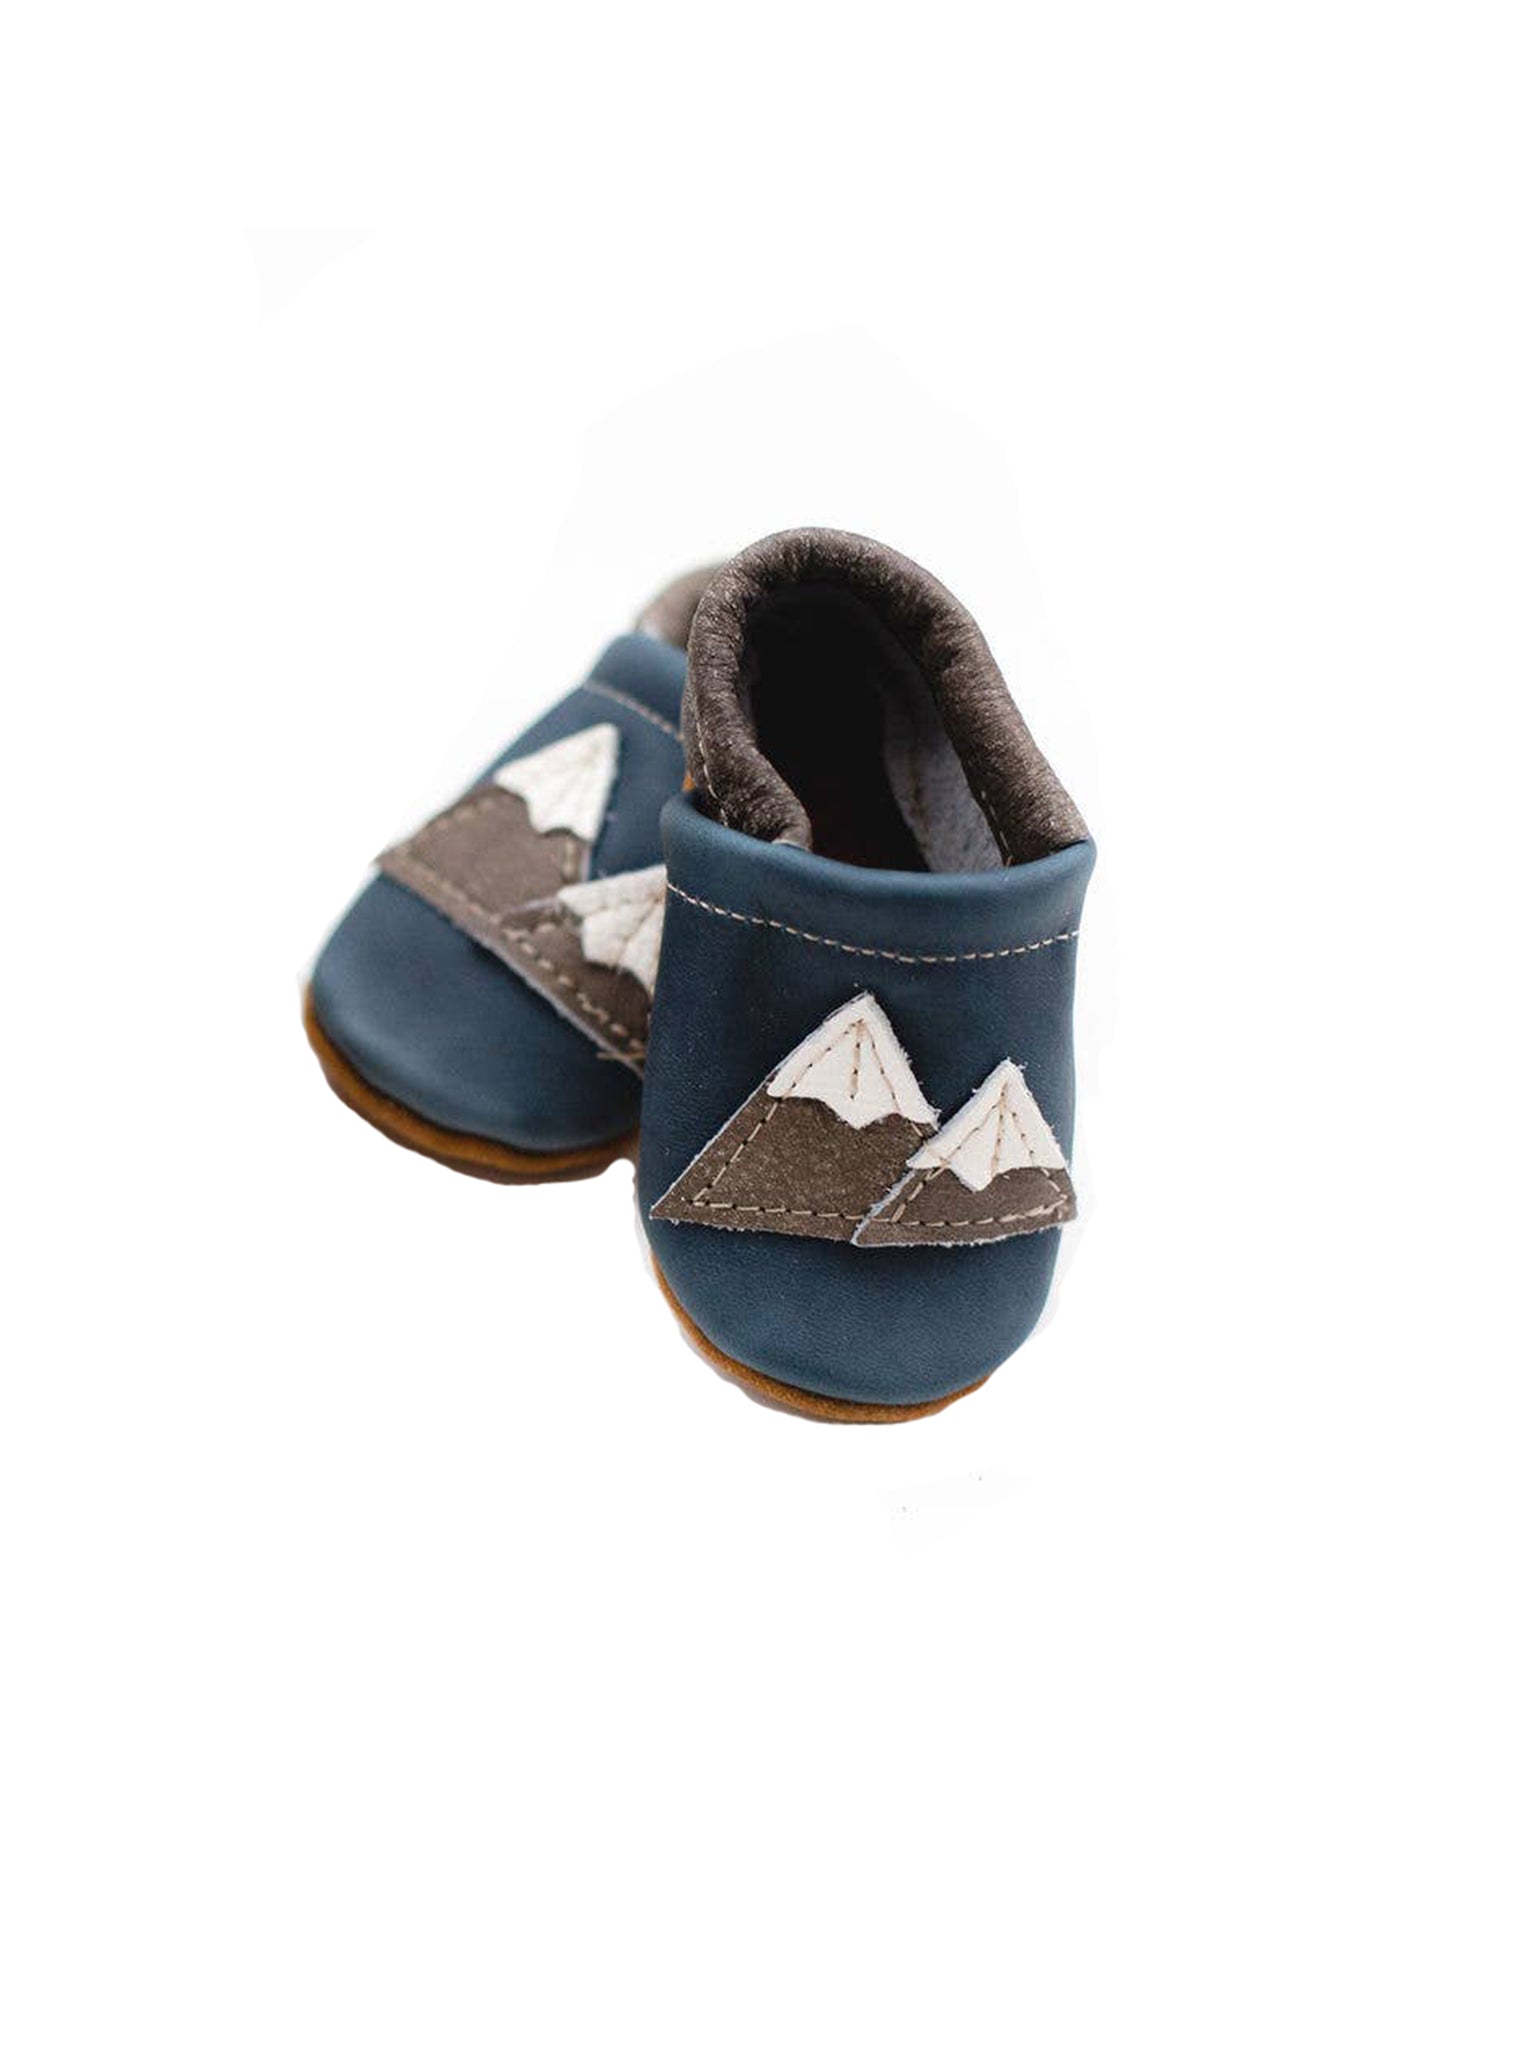 Denim Mountains Leather Baby Shoes Weston Table